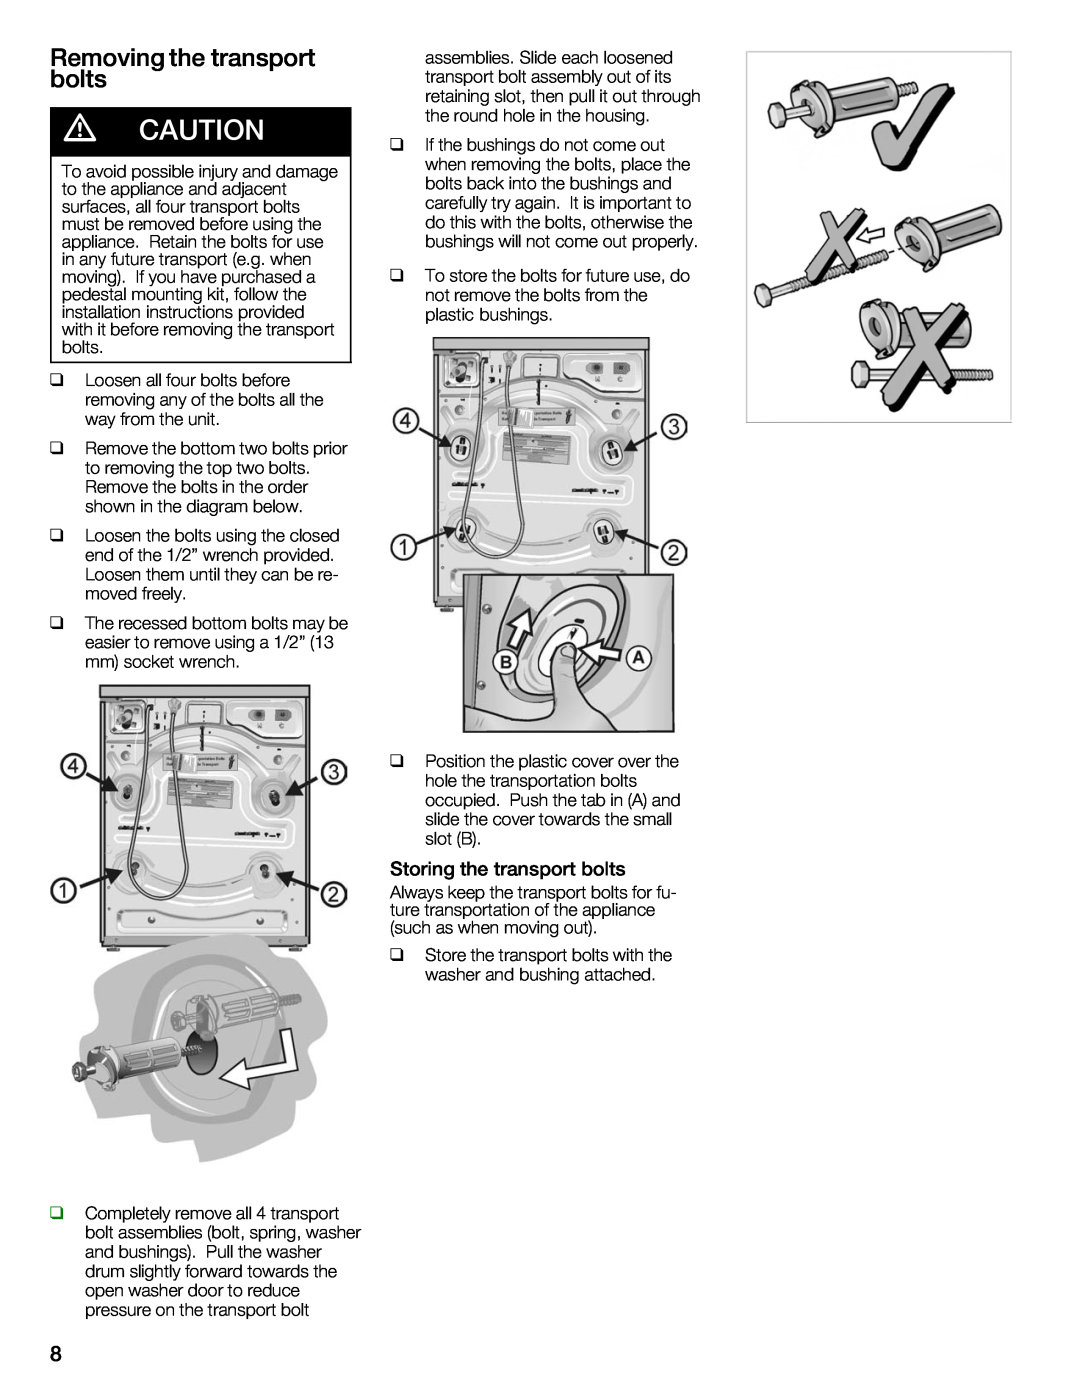 Bosch Appliances 500 Plus Series manual Removing, Storing the transport bolts 